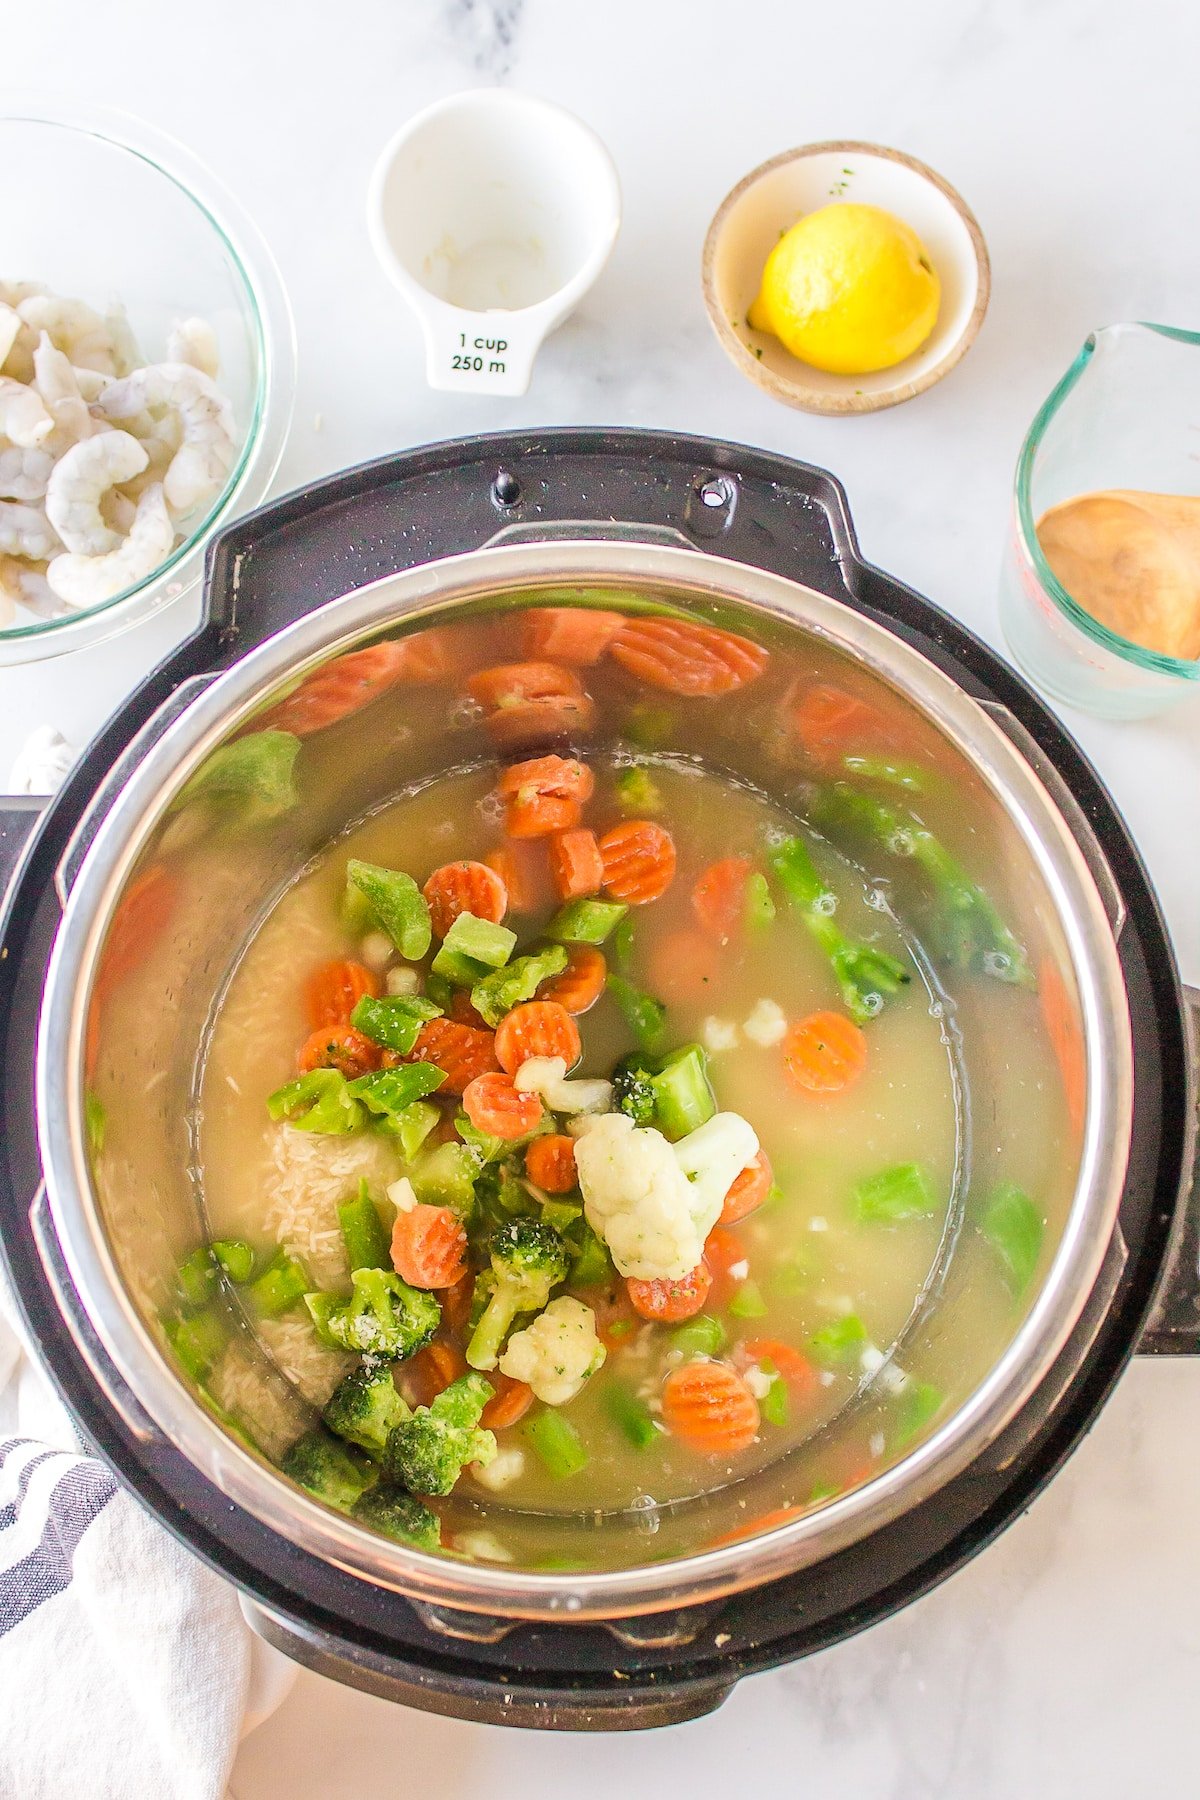 Broth and frozen veggies in the liner of an Instant Pot.